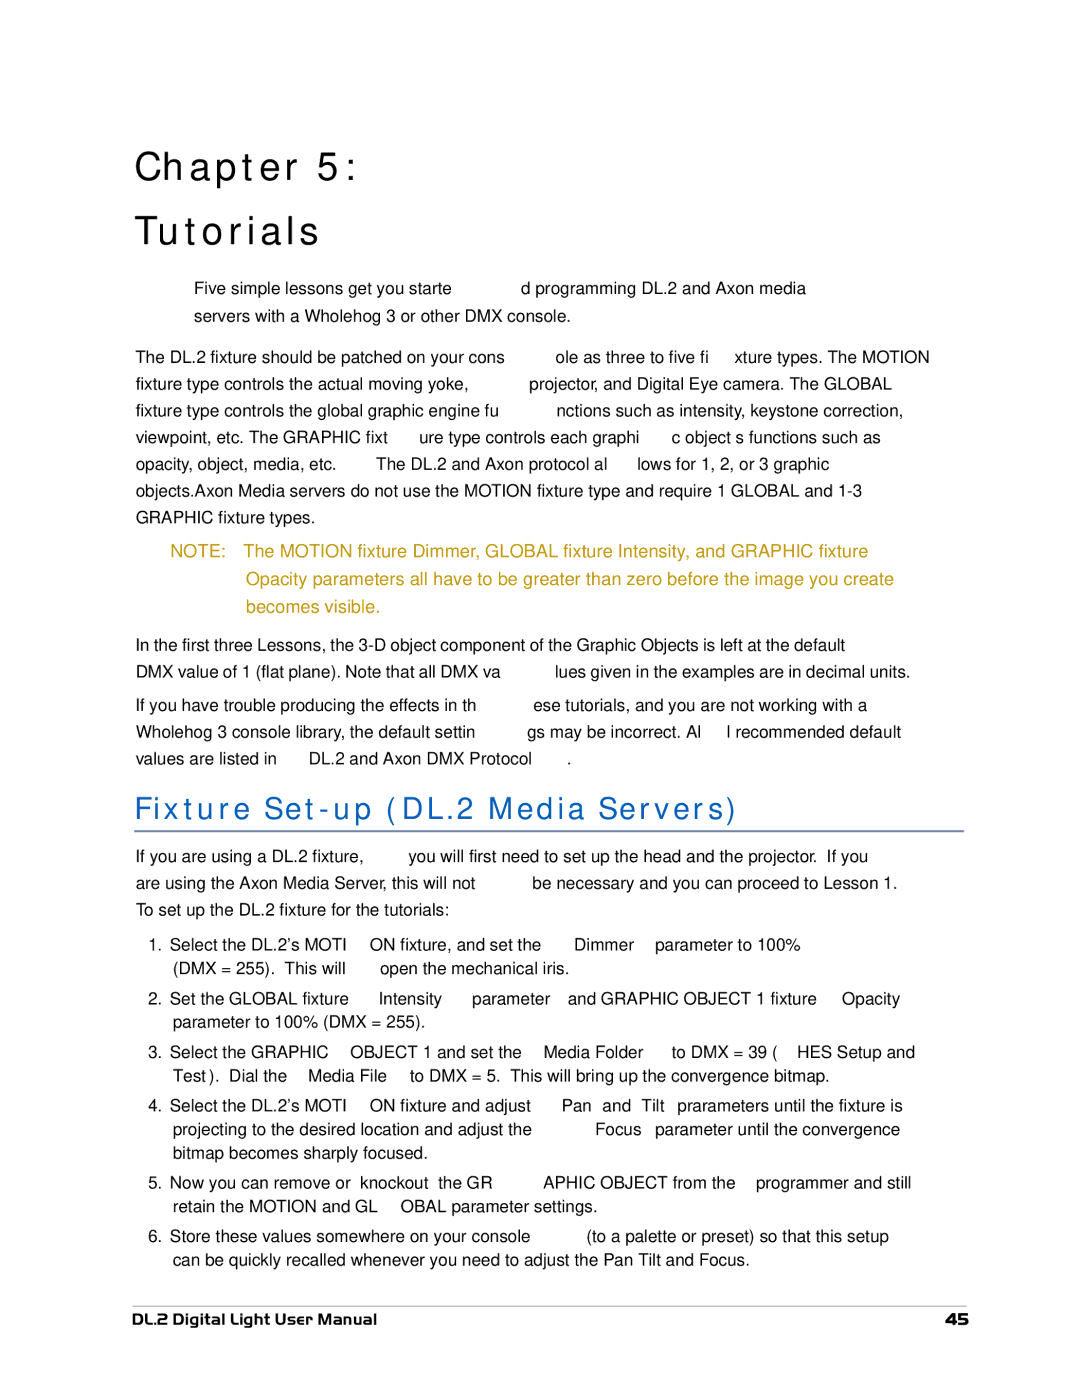 High End Systems user manual Chapter Tutorials, Fixture Set-up DL.2 Media Servers 